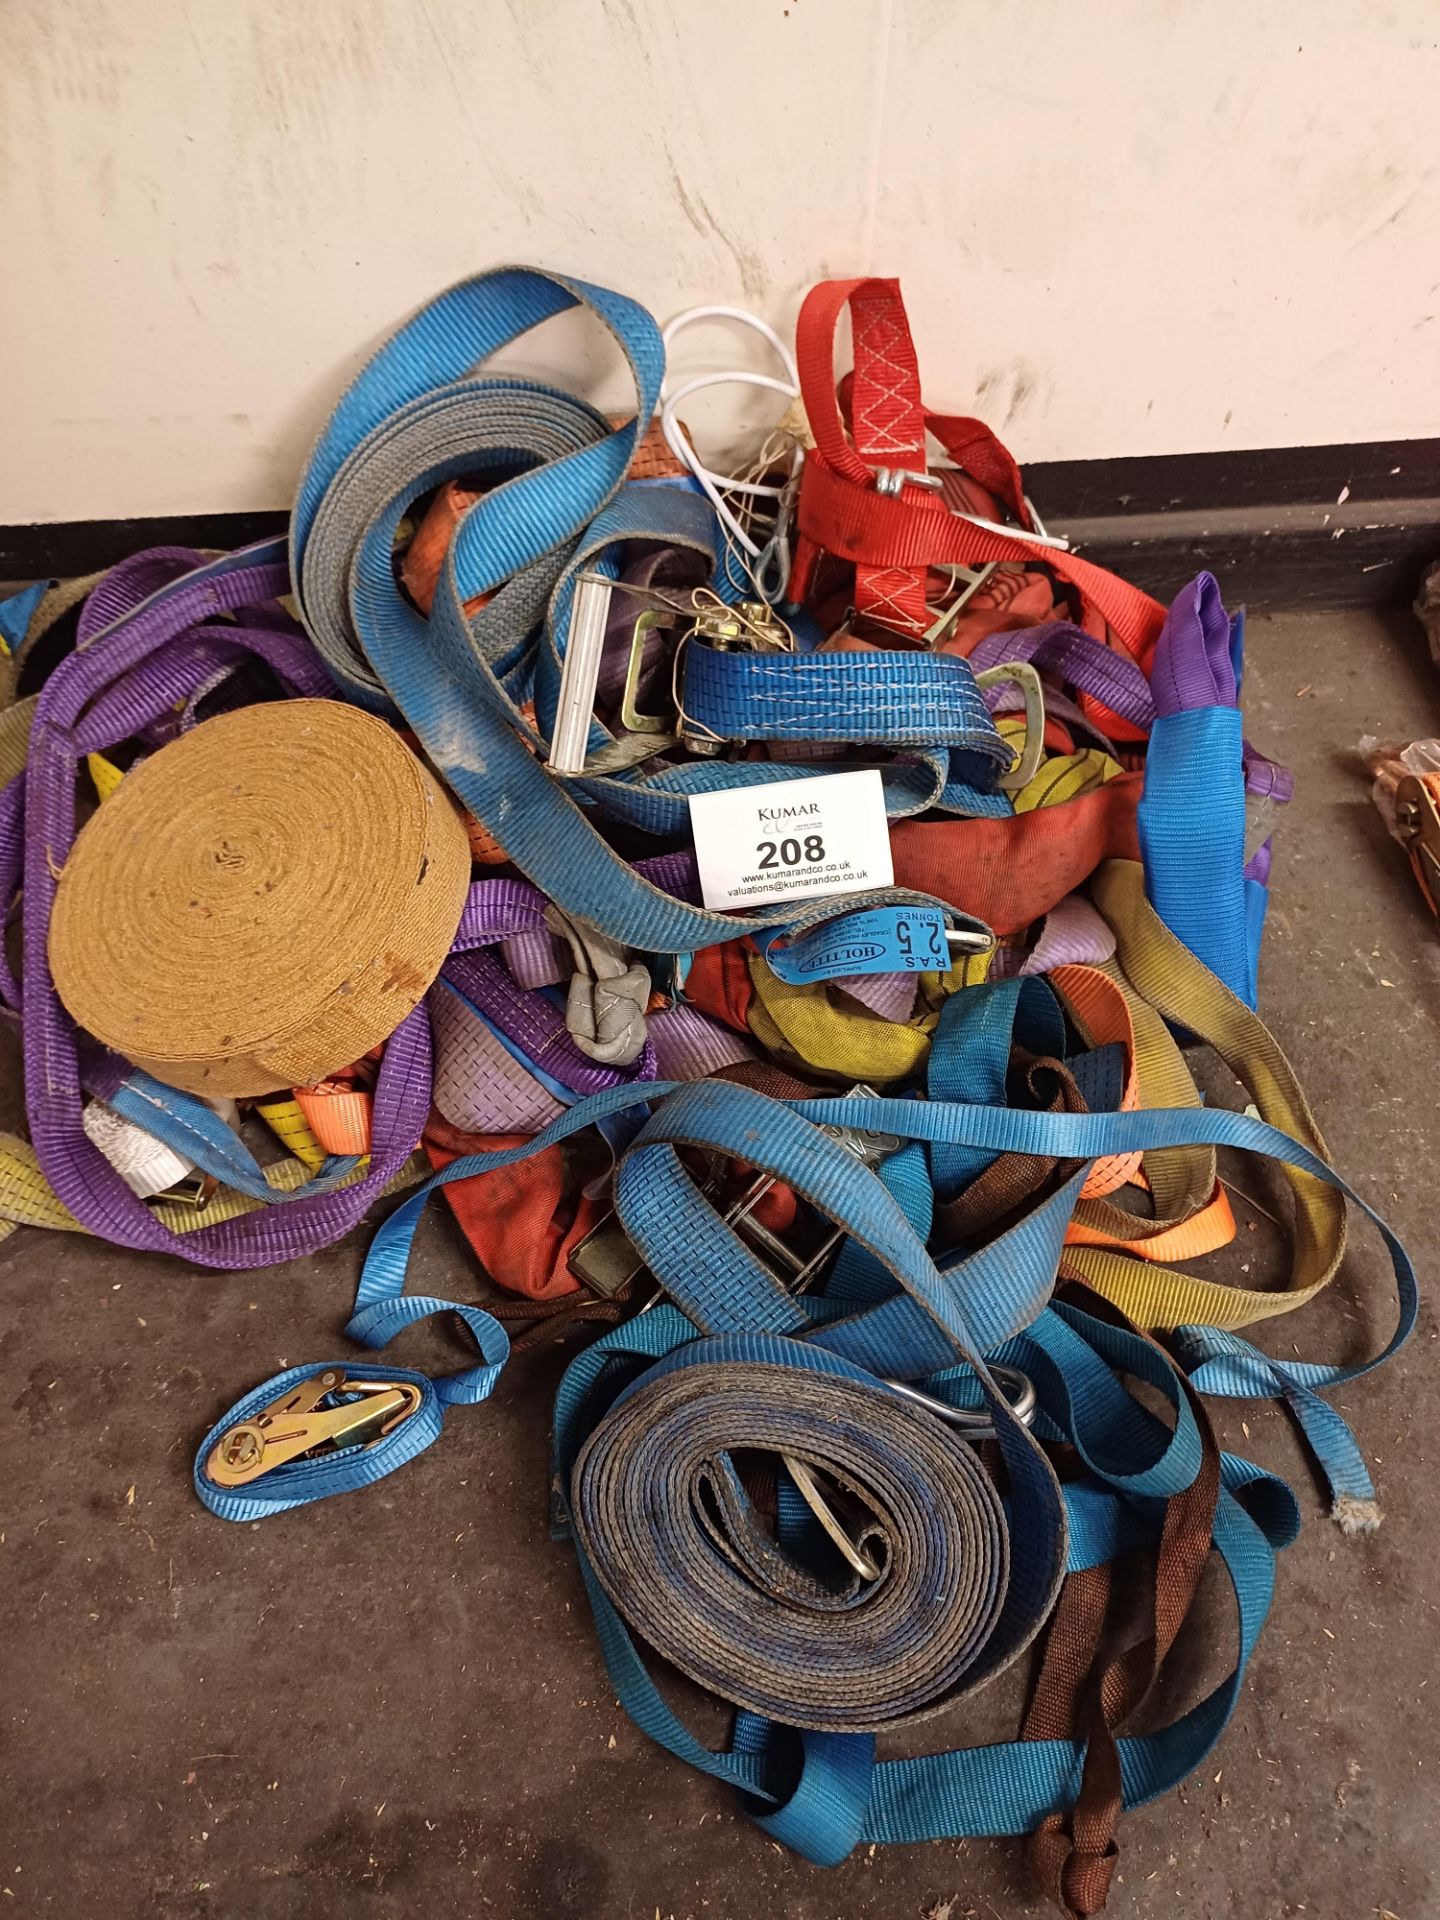 Assortment of Racket Straps - Image 2 of 4